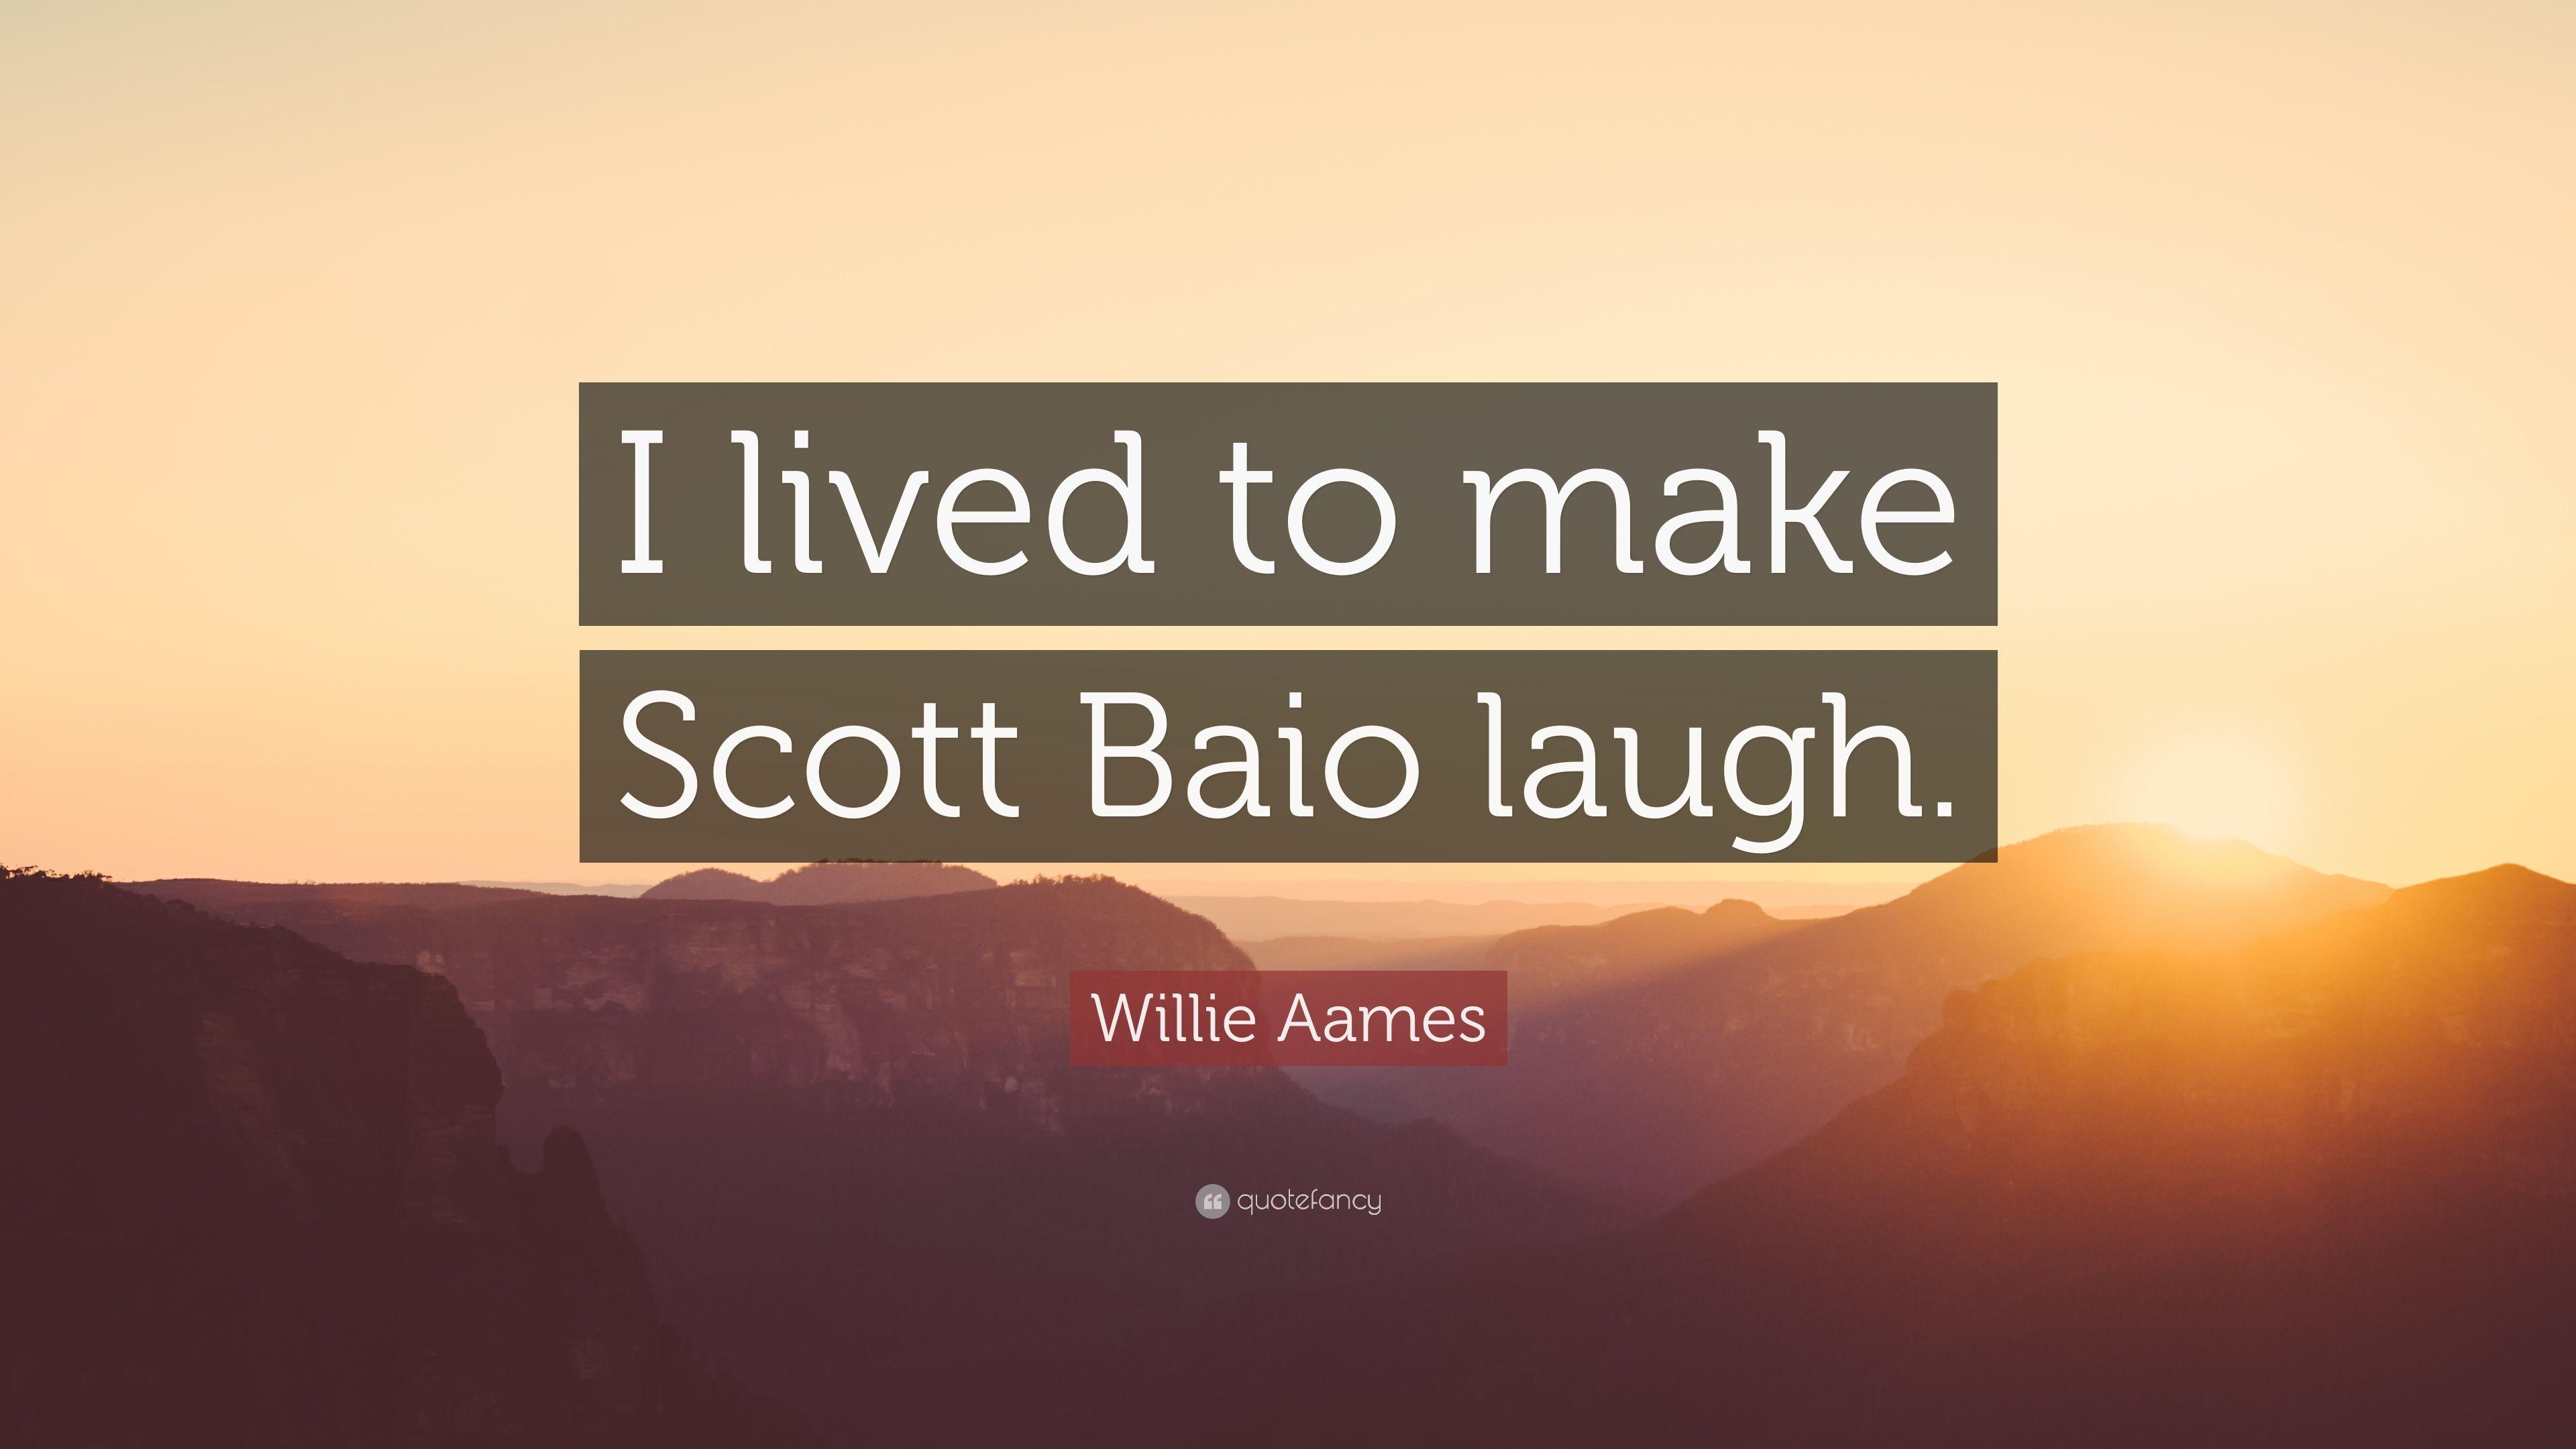 Willie Aames Quote: “I lived to make Scott Baio laugh.” 7